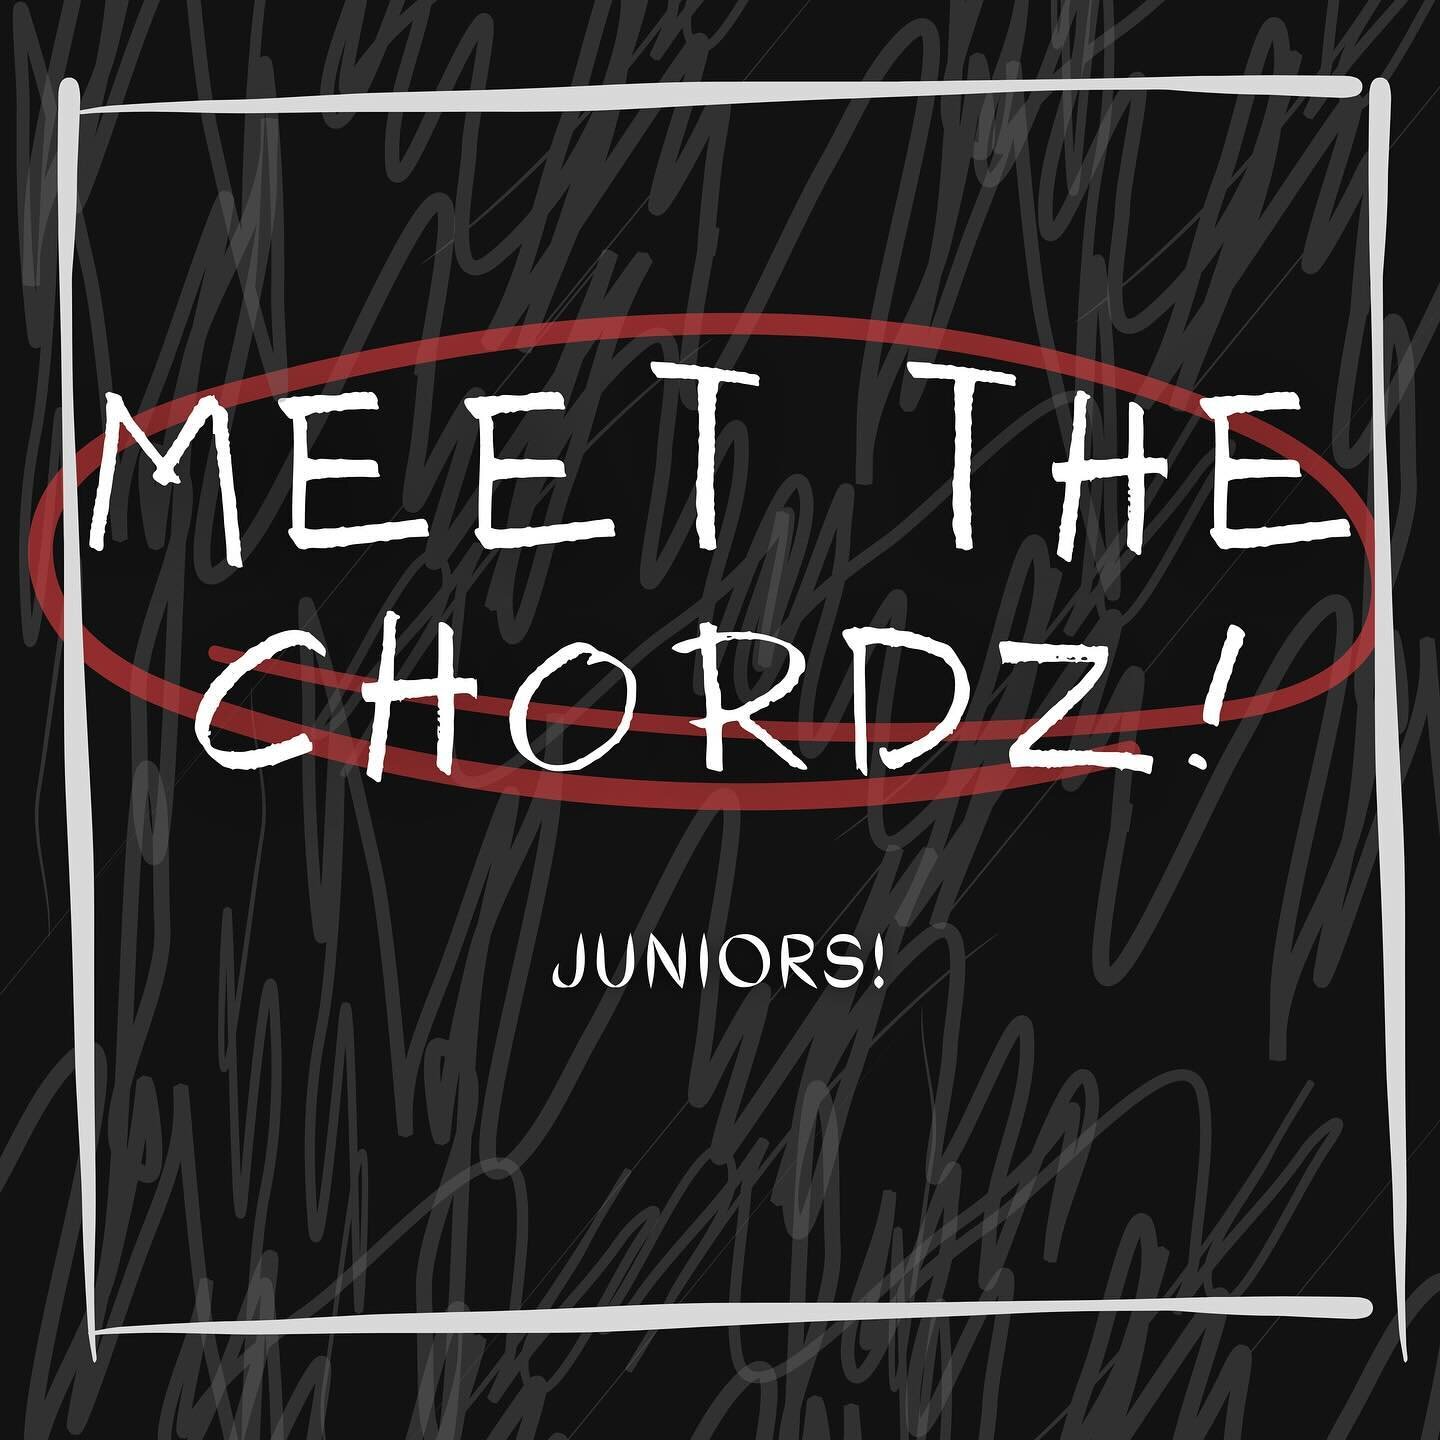 Strap in folks! 💺Today we got a big group!!! Swipe above to get to know the current juniors of the Chordials 🥳🥳🥳❤️🖤❤️🍸